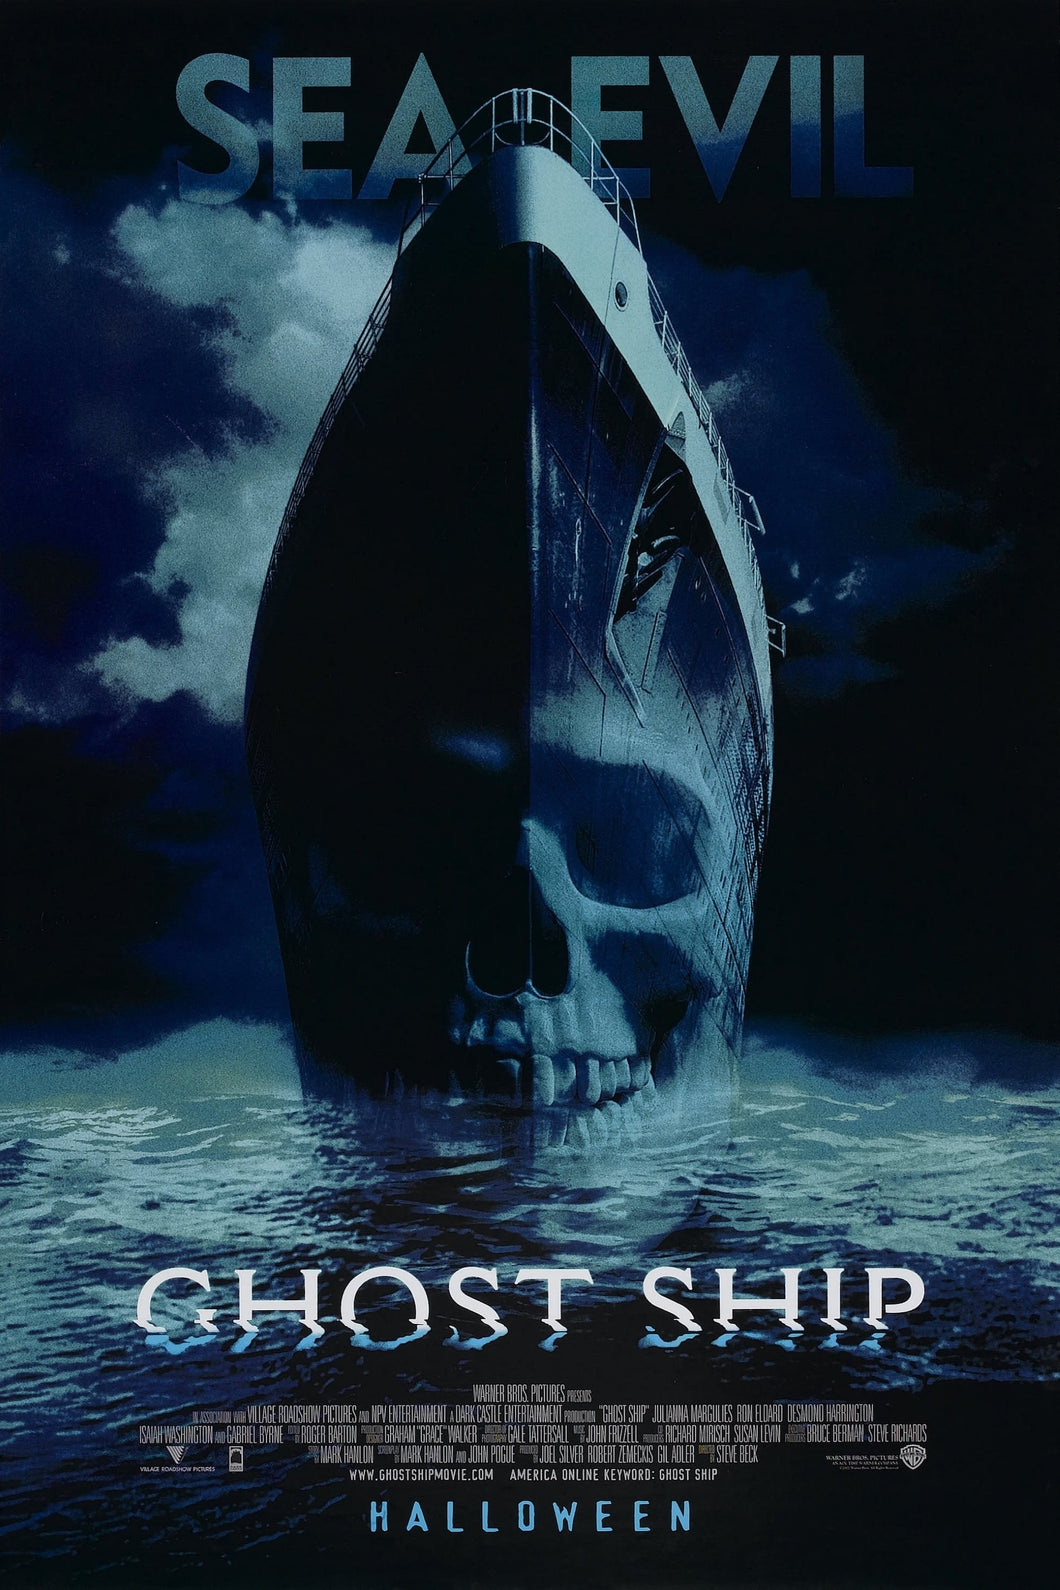 Ghost Ship (2002) Movie Poster High Quality Glossy Paper A1 A2 A3 A4 A3 Framed or Unframed!!!